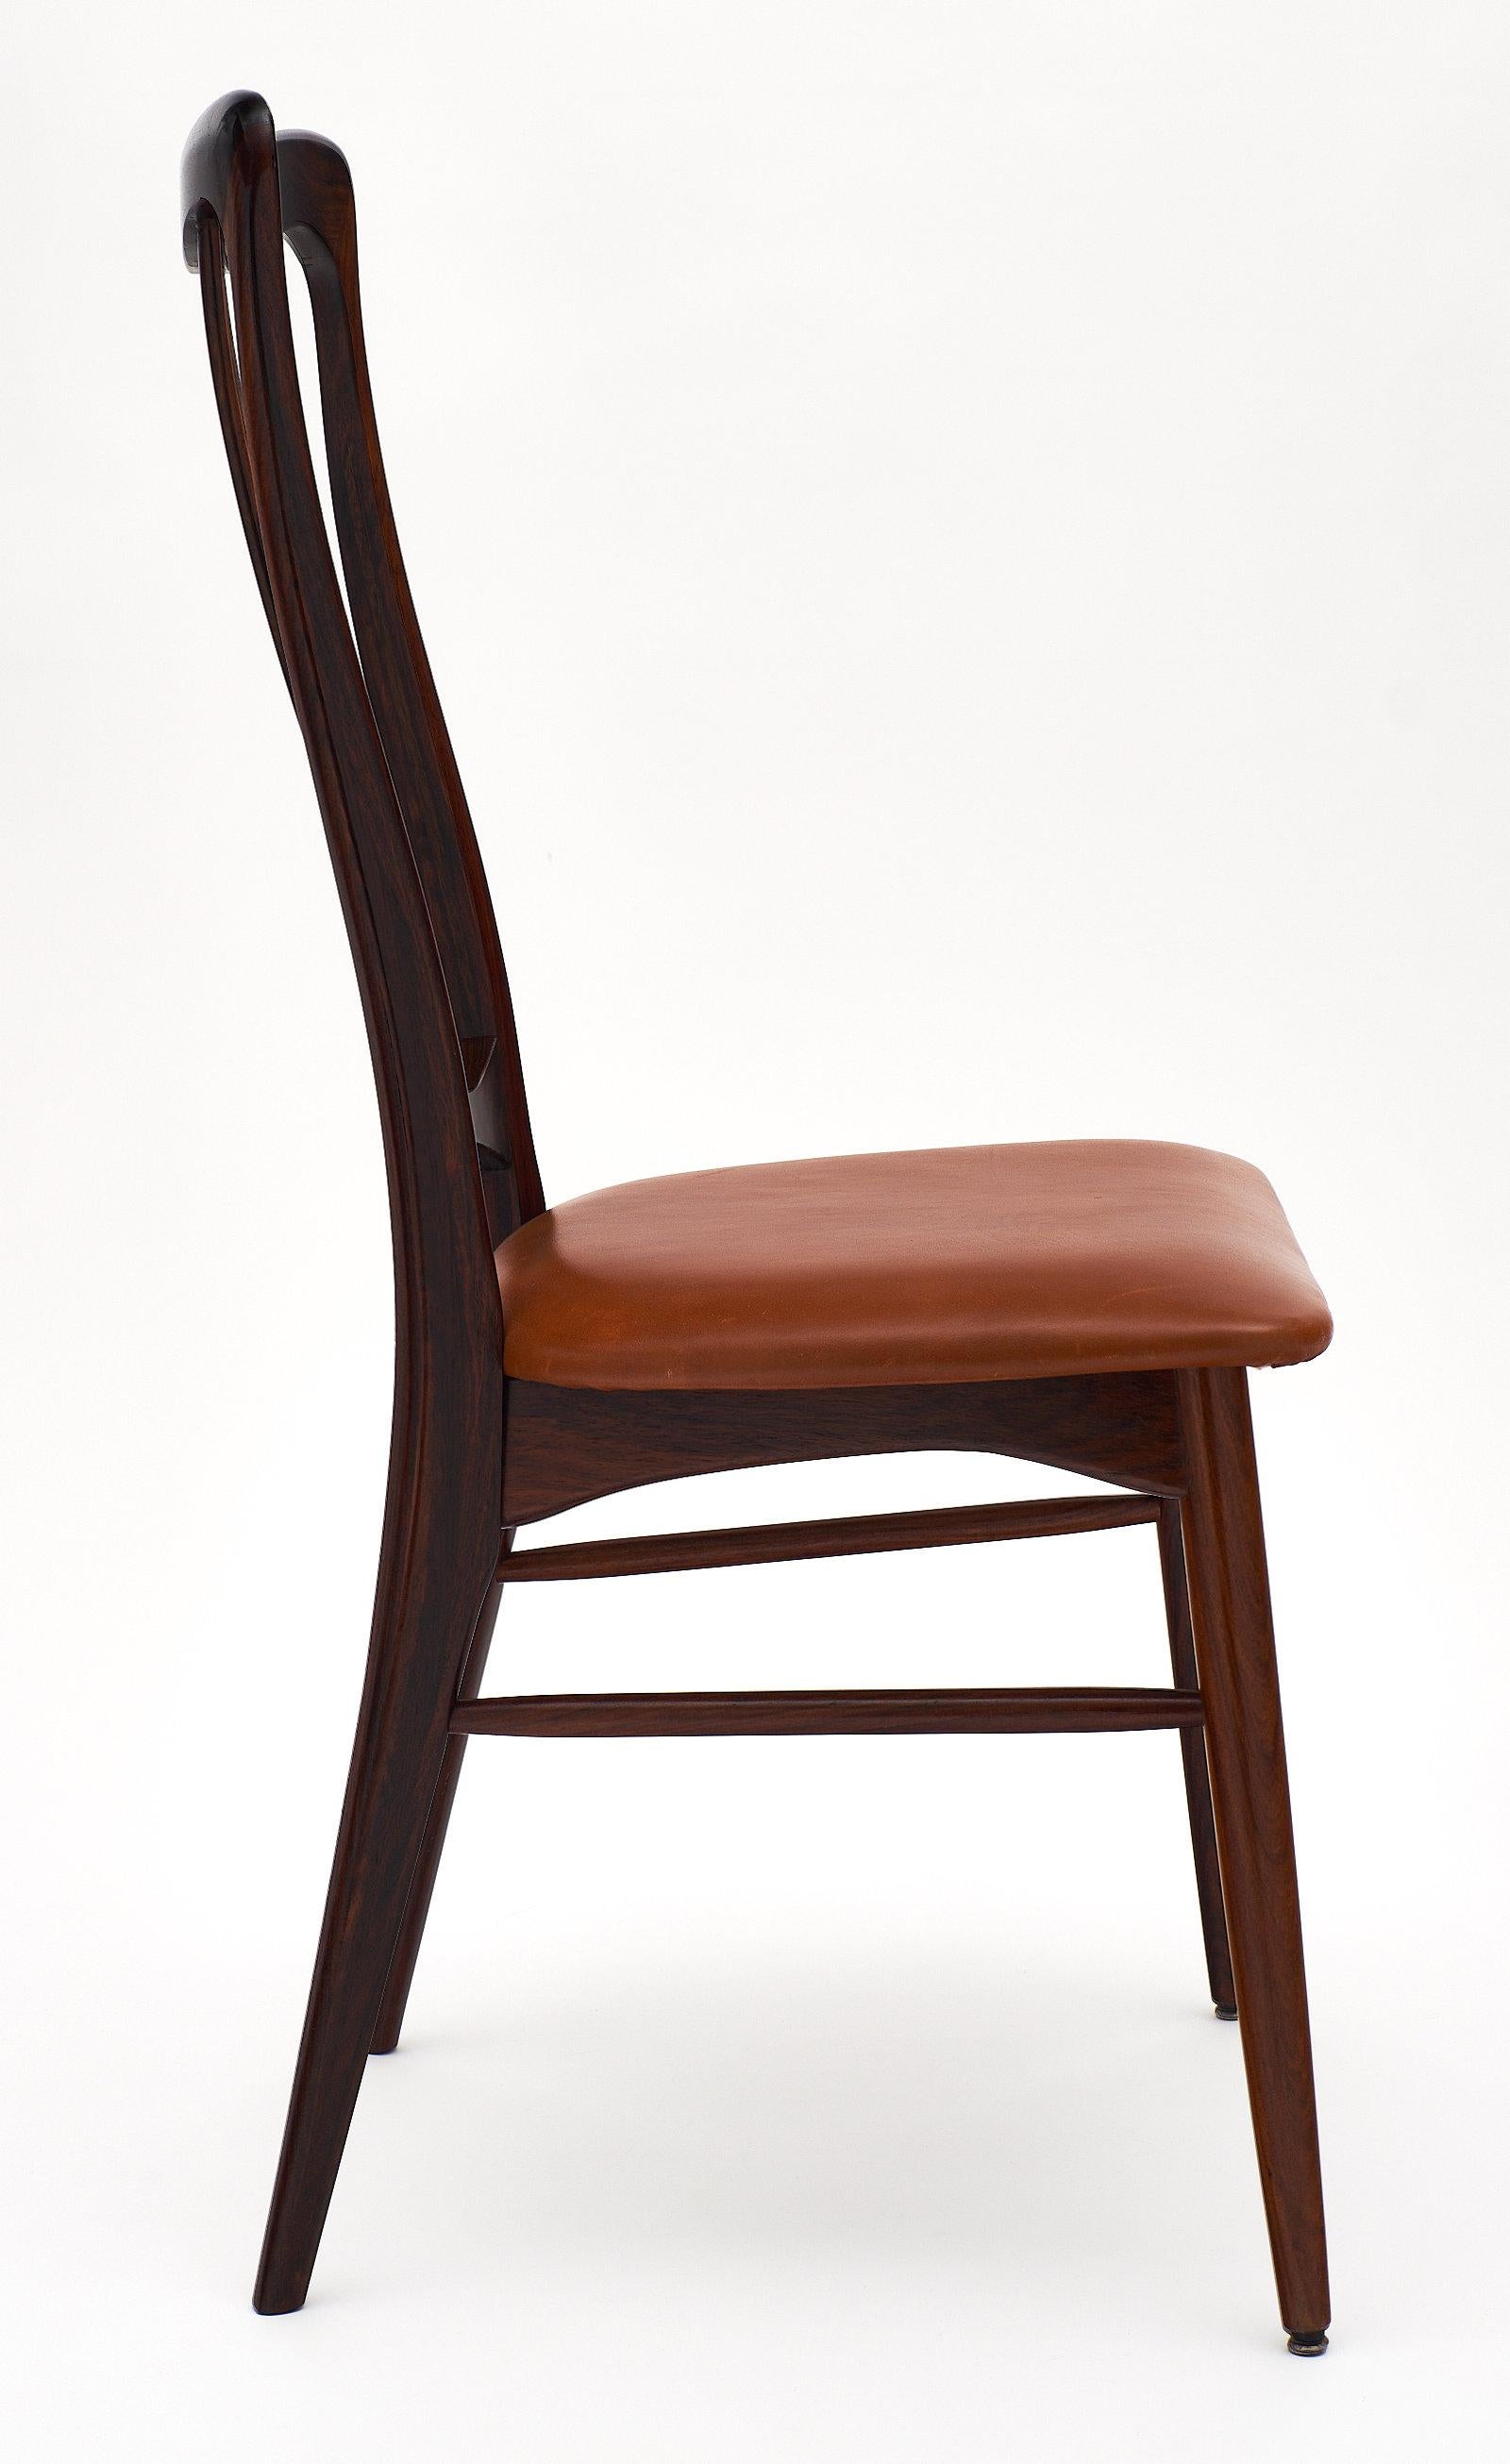 Mid-20th Century Danish “Ingrid” Dining Chairs by Koefoeds Hornslet